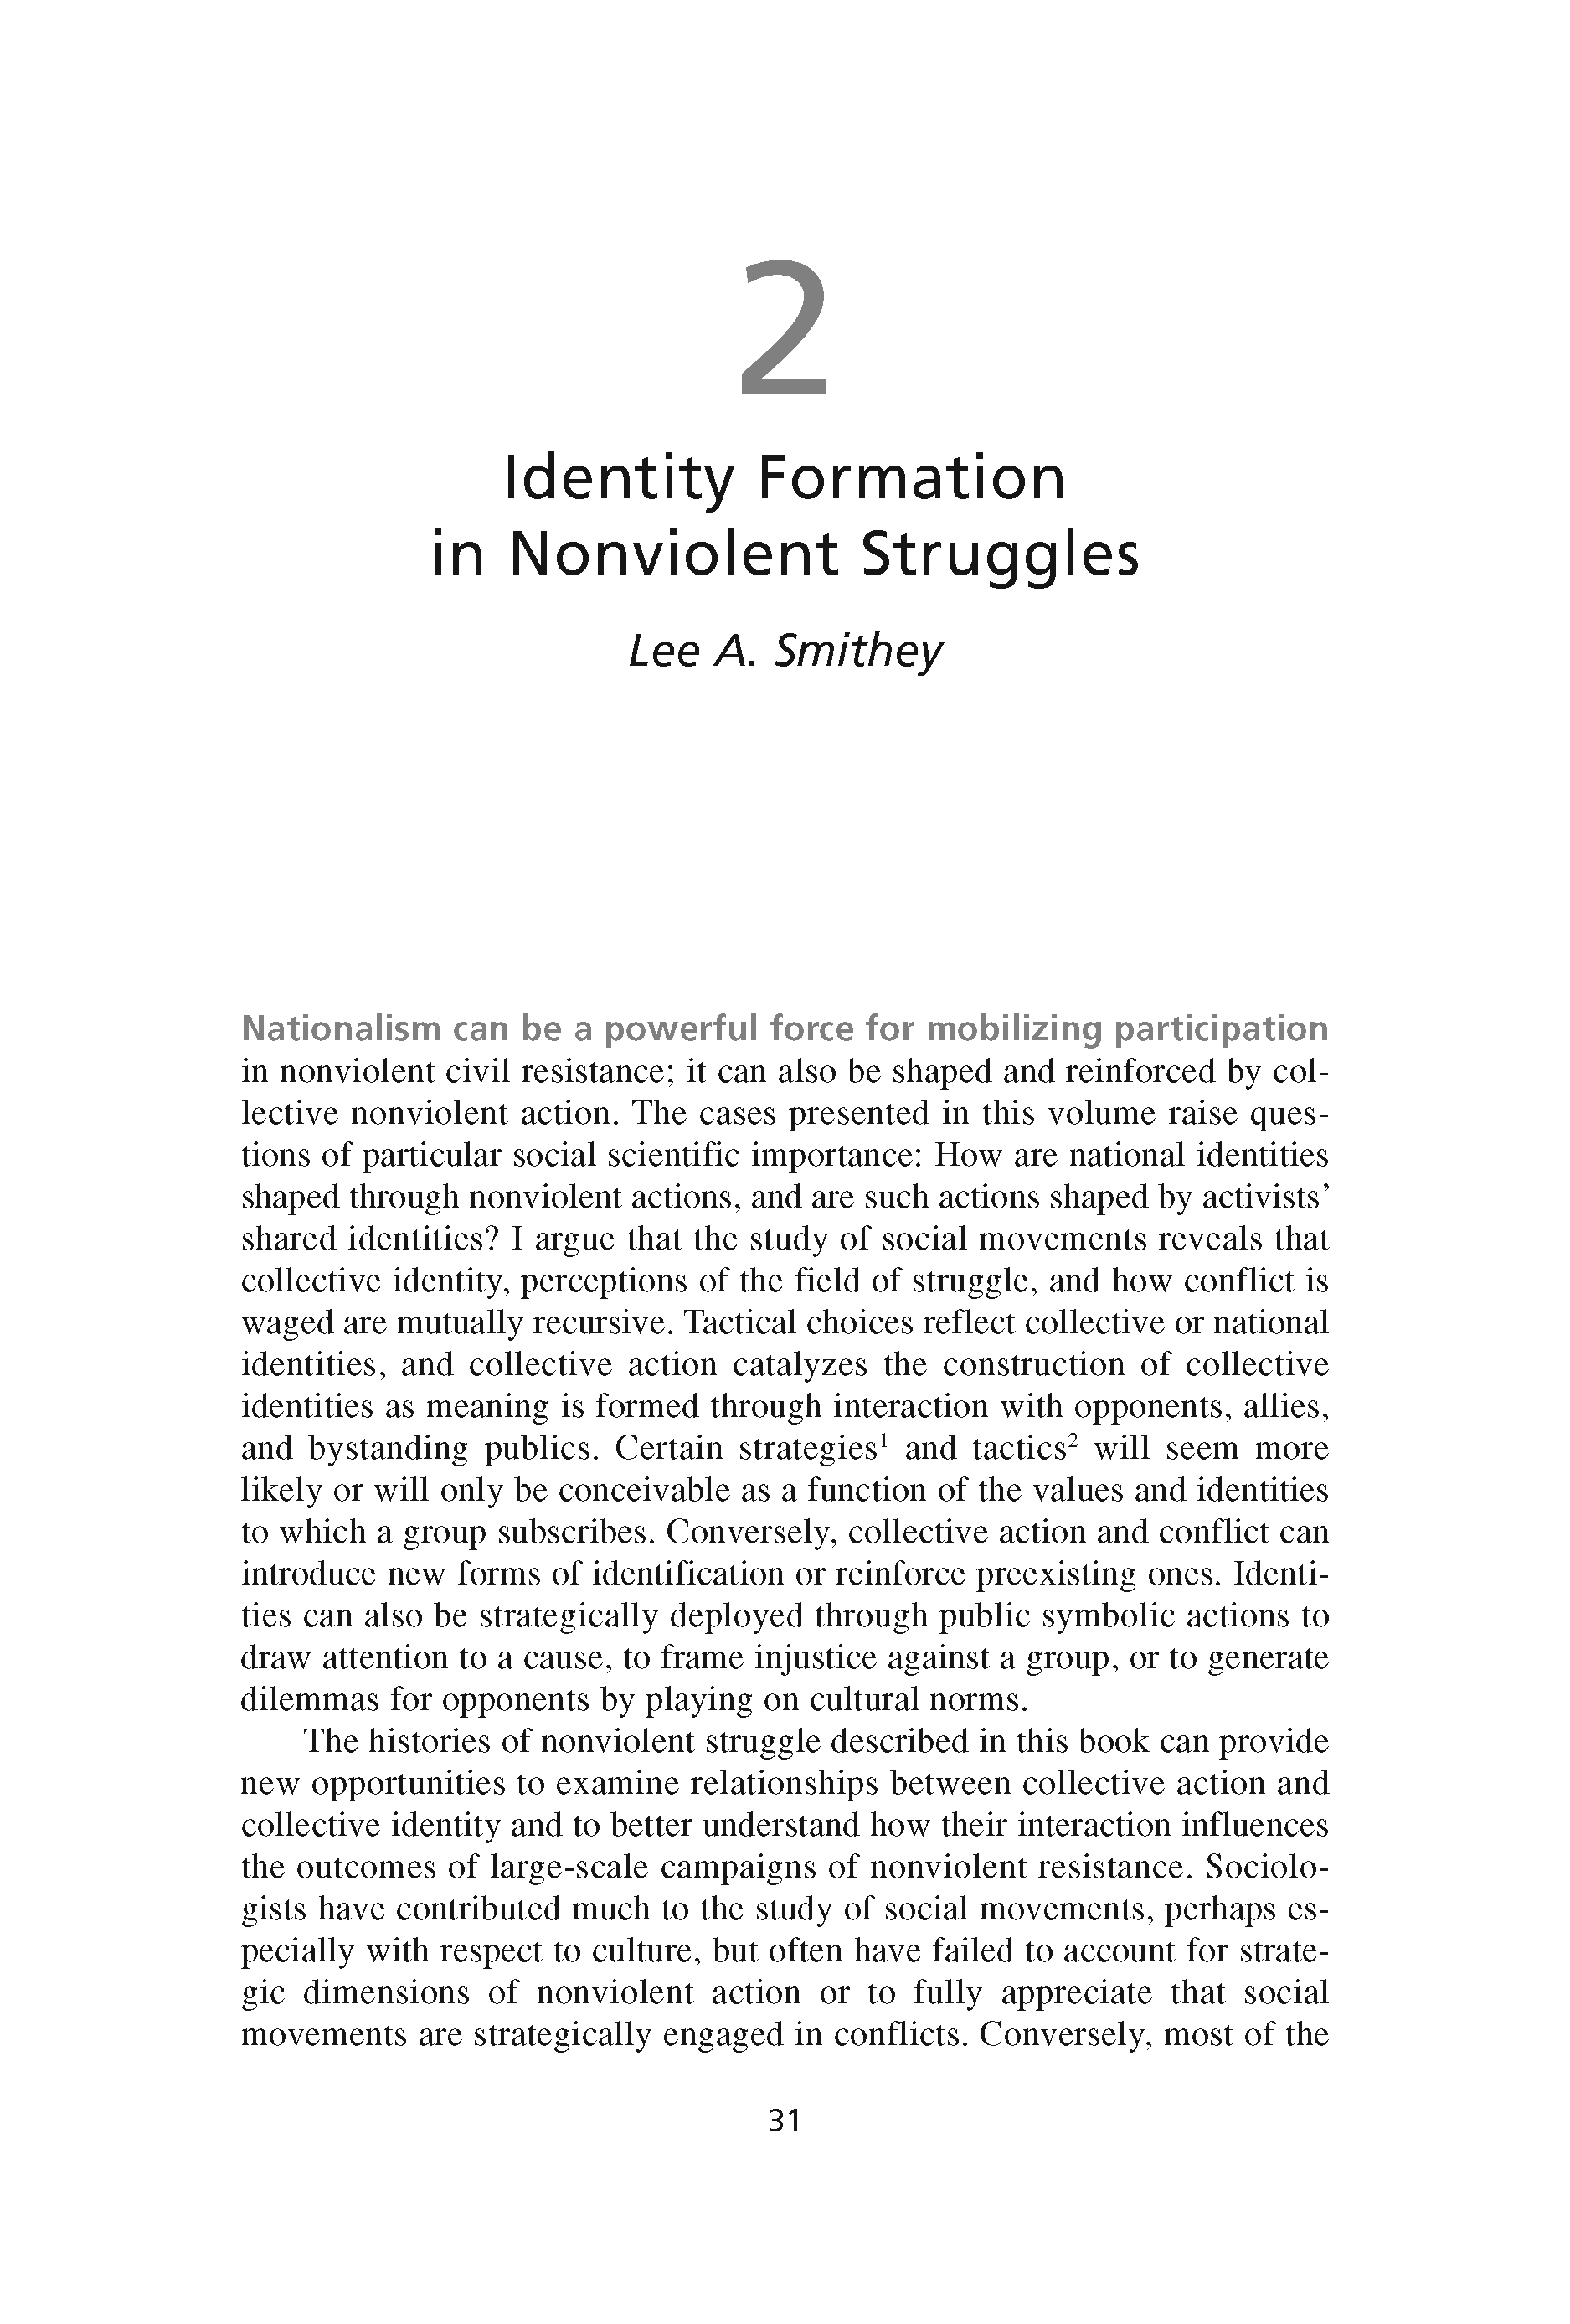 Identity Formation in Nonviolent Struggles (Chapter 2 from ‘Recovering Nonviolent History’)